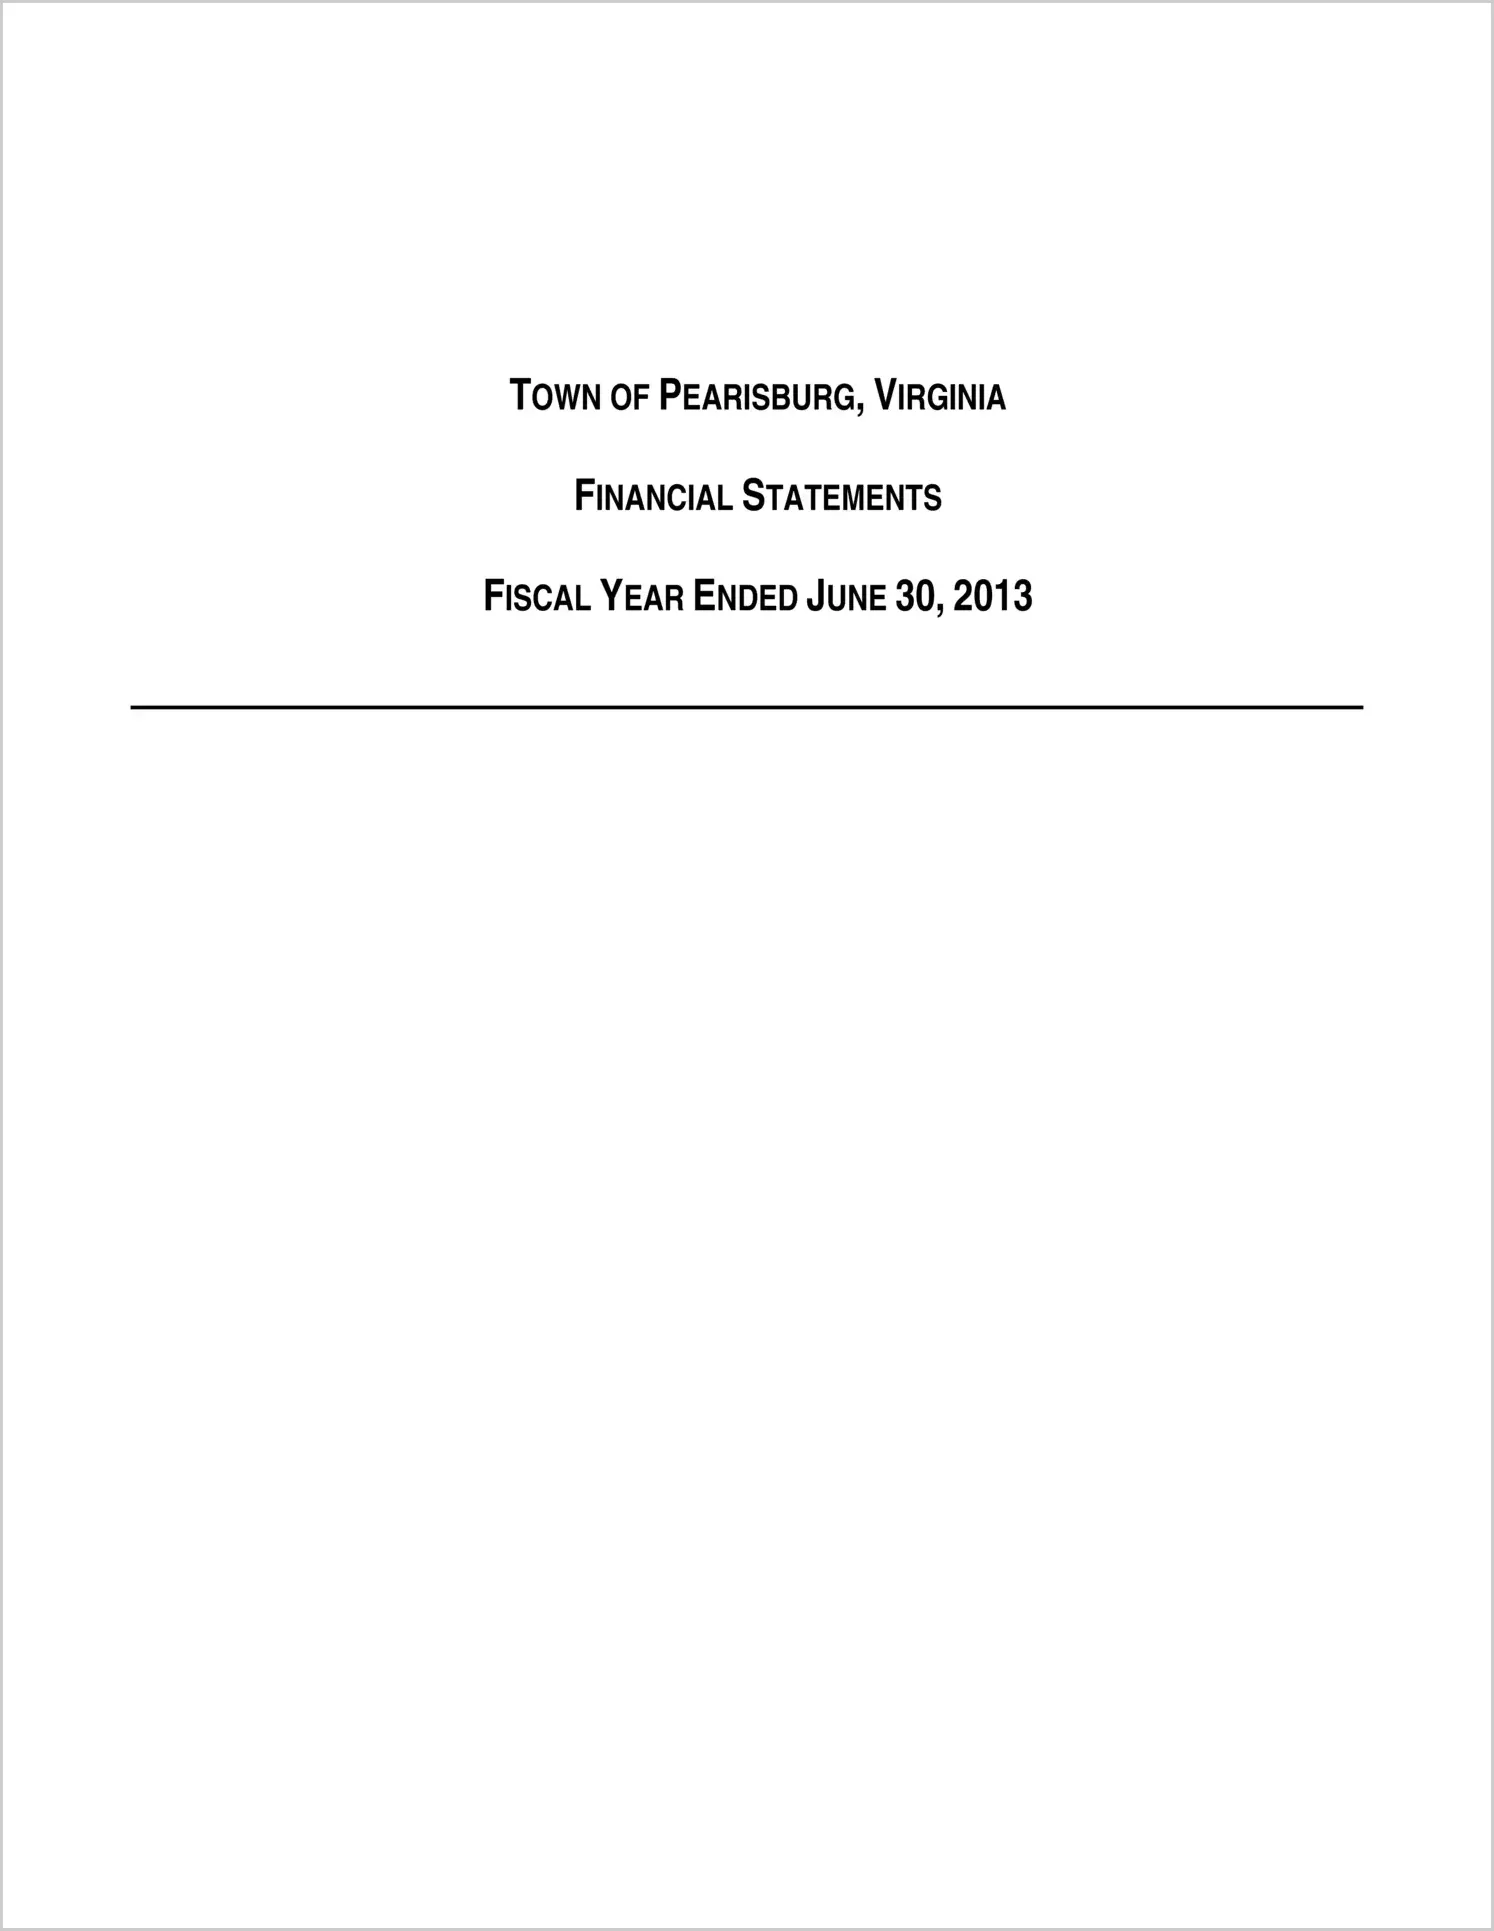 2013 Annual Financial Report for Town of Pearisburg